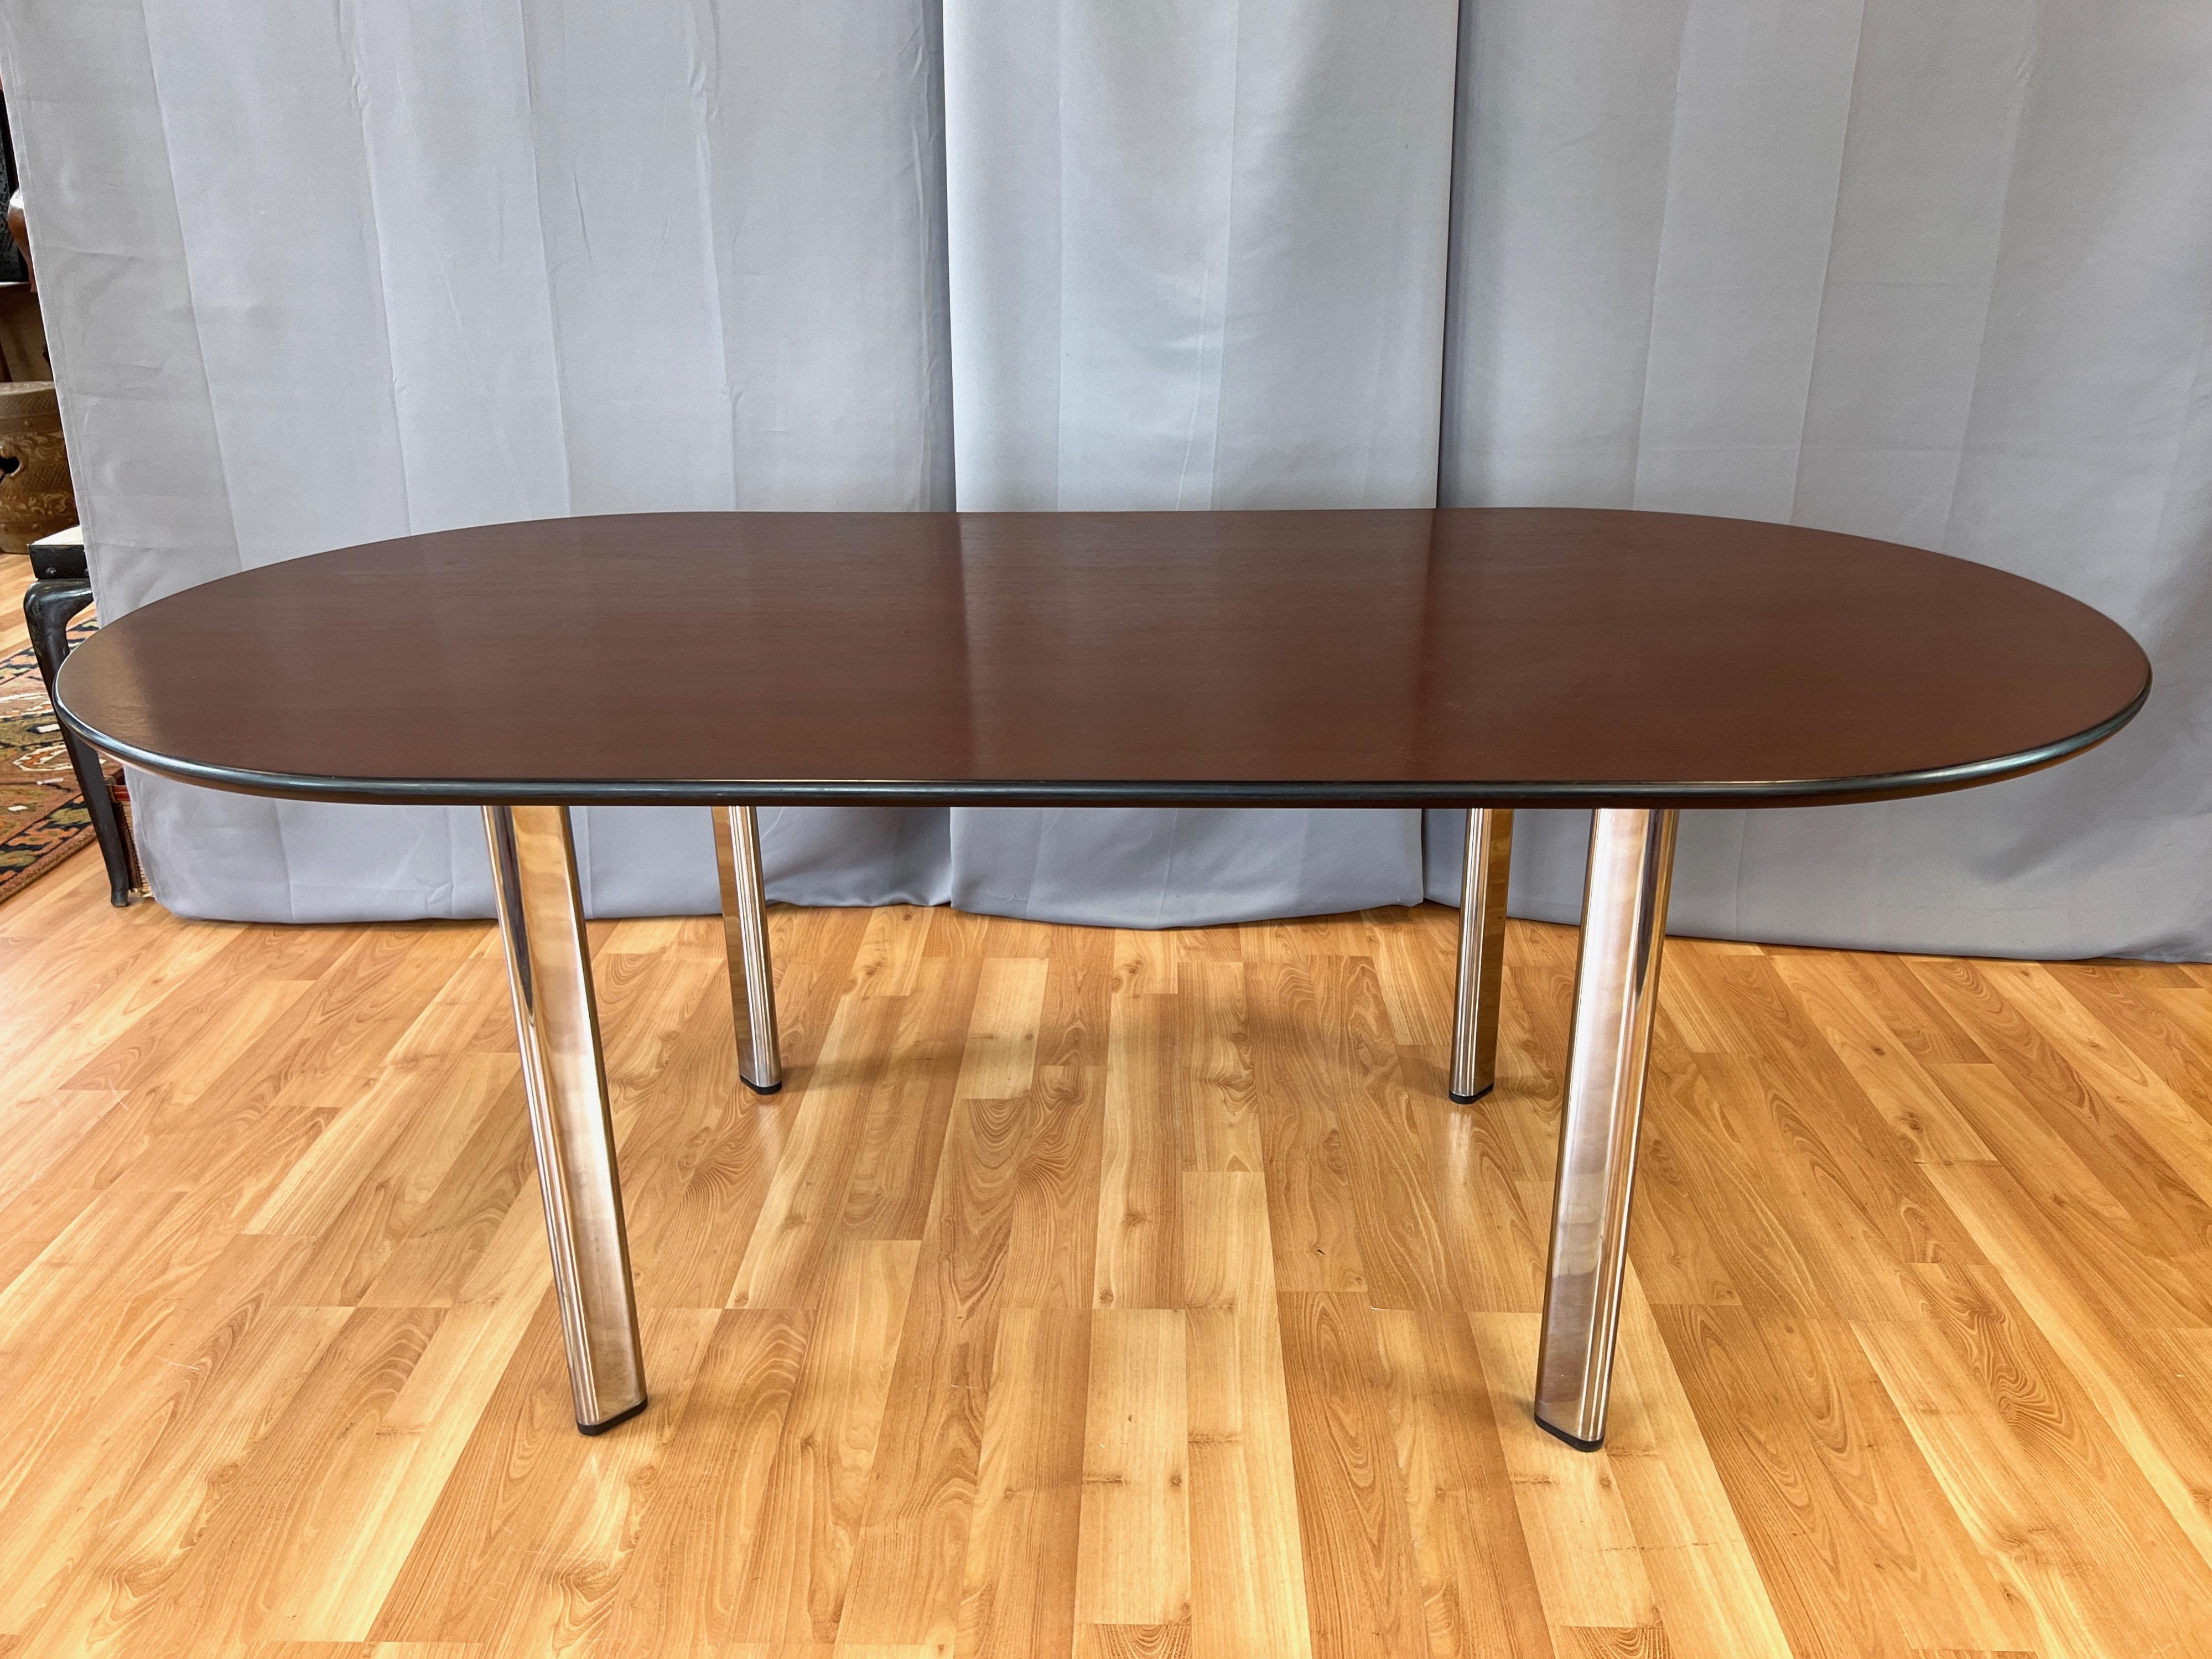 Joseph D’Urso for Knoll High Table in American Cherry and Chrome, 1995 For Sale 3